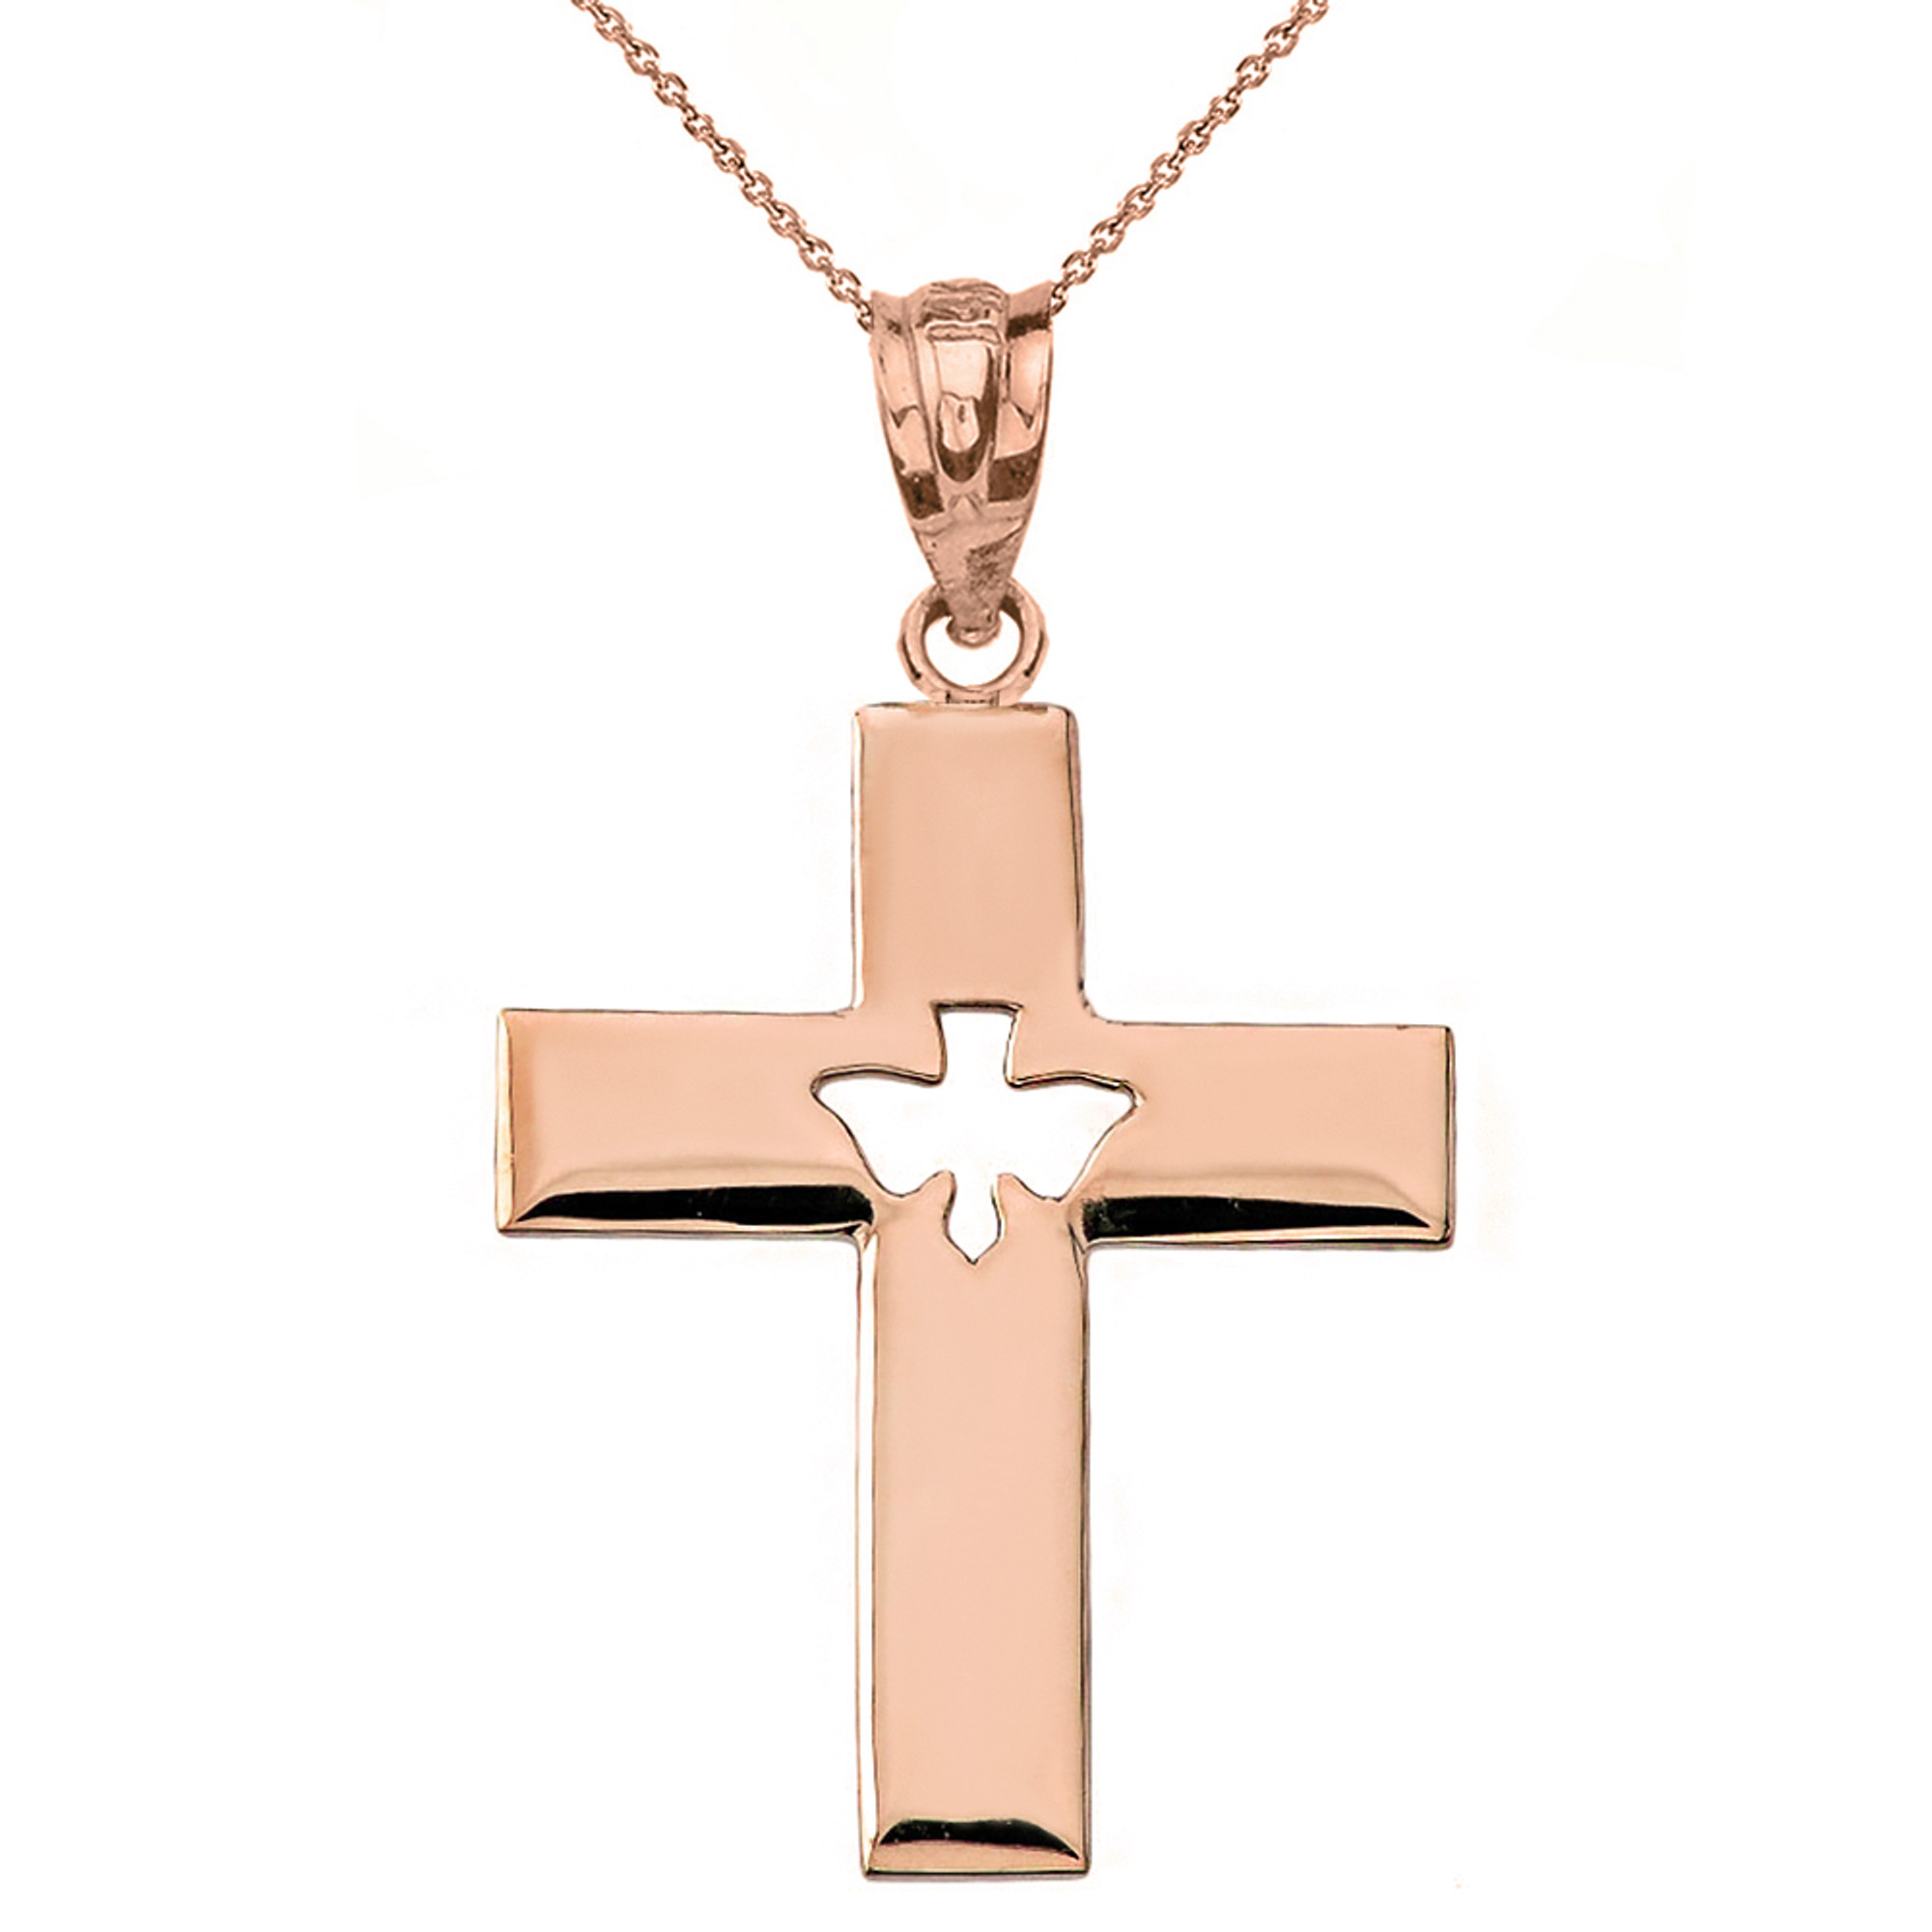 Solid Rose Gold Cross with Dove Holy Spirit Cut Out Pendant Necklace